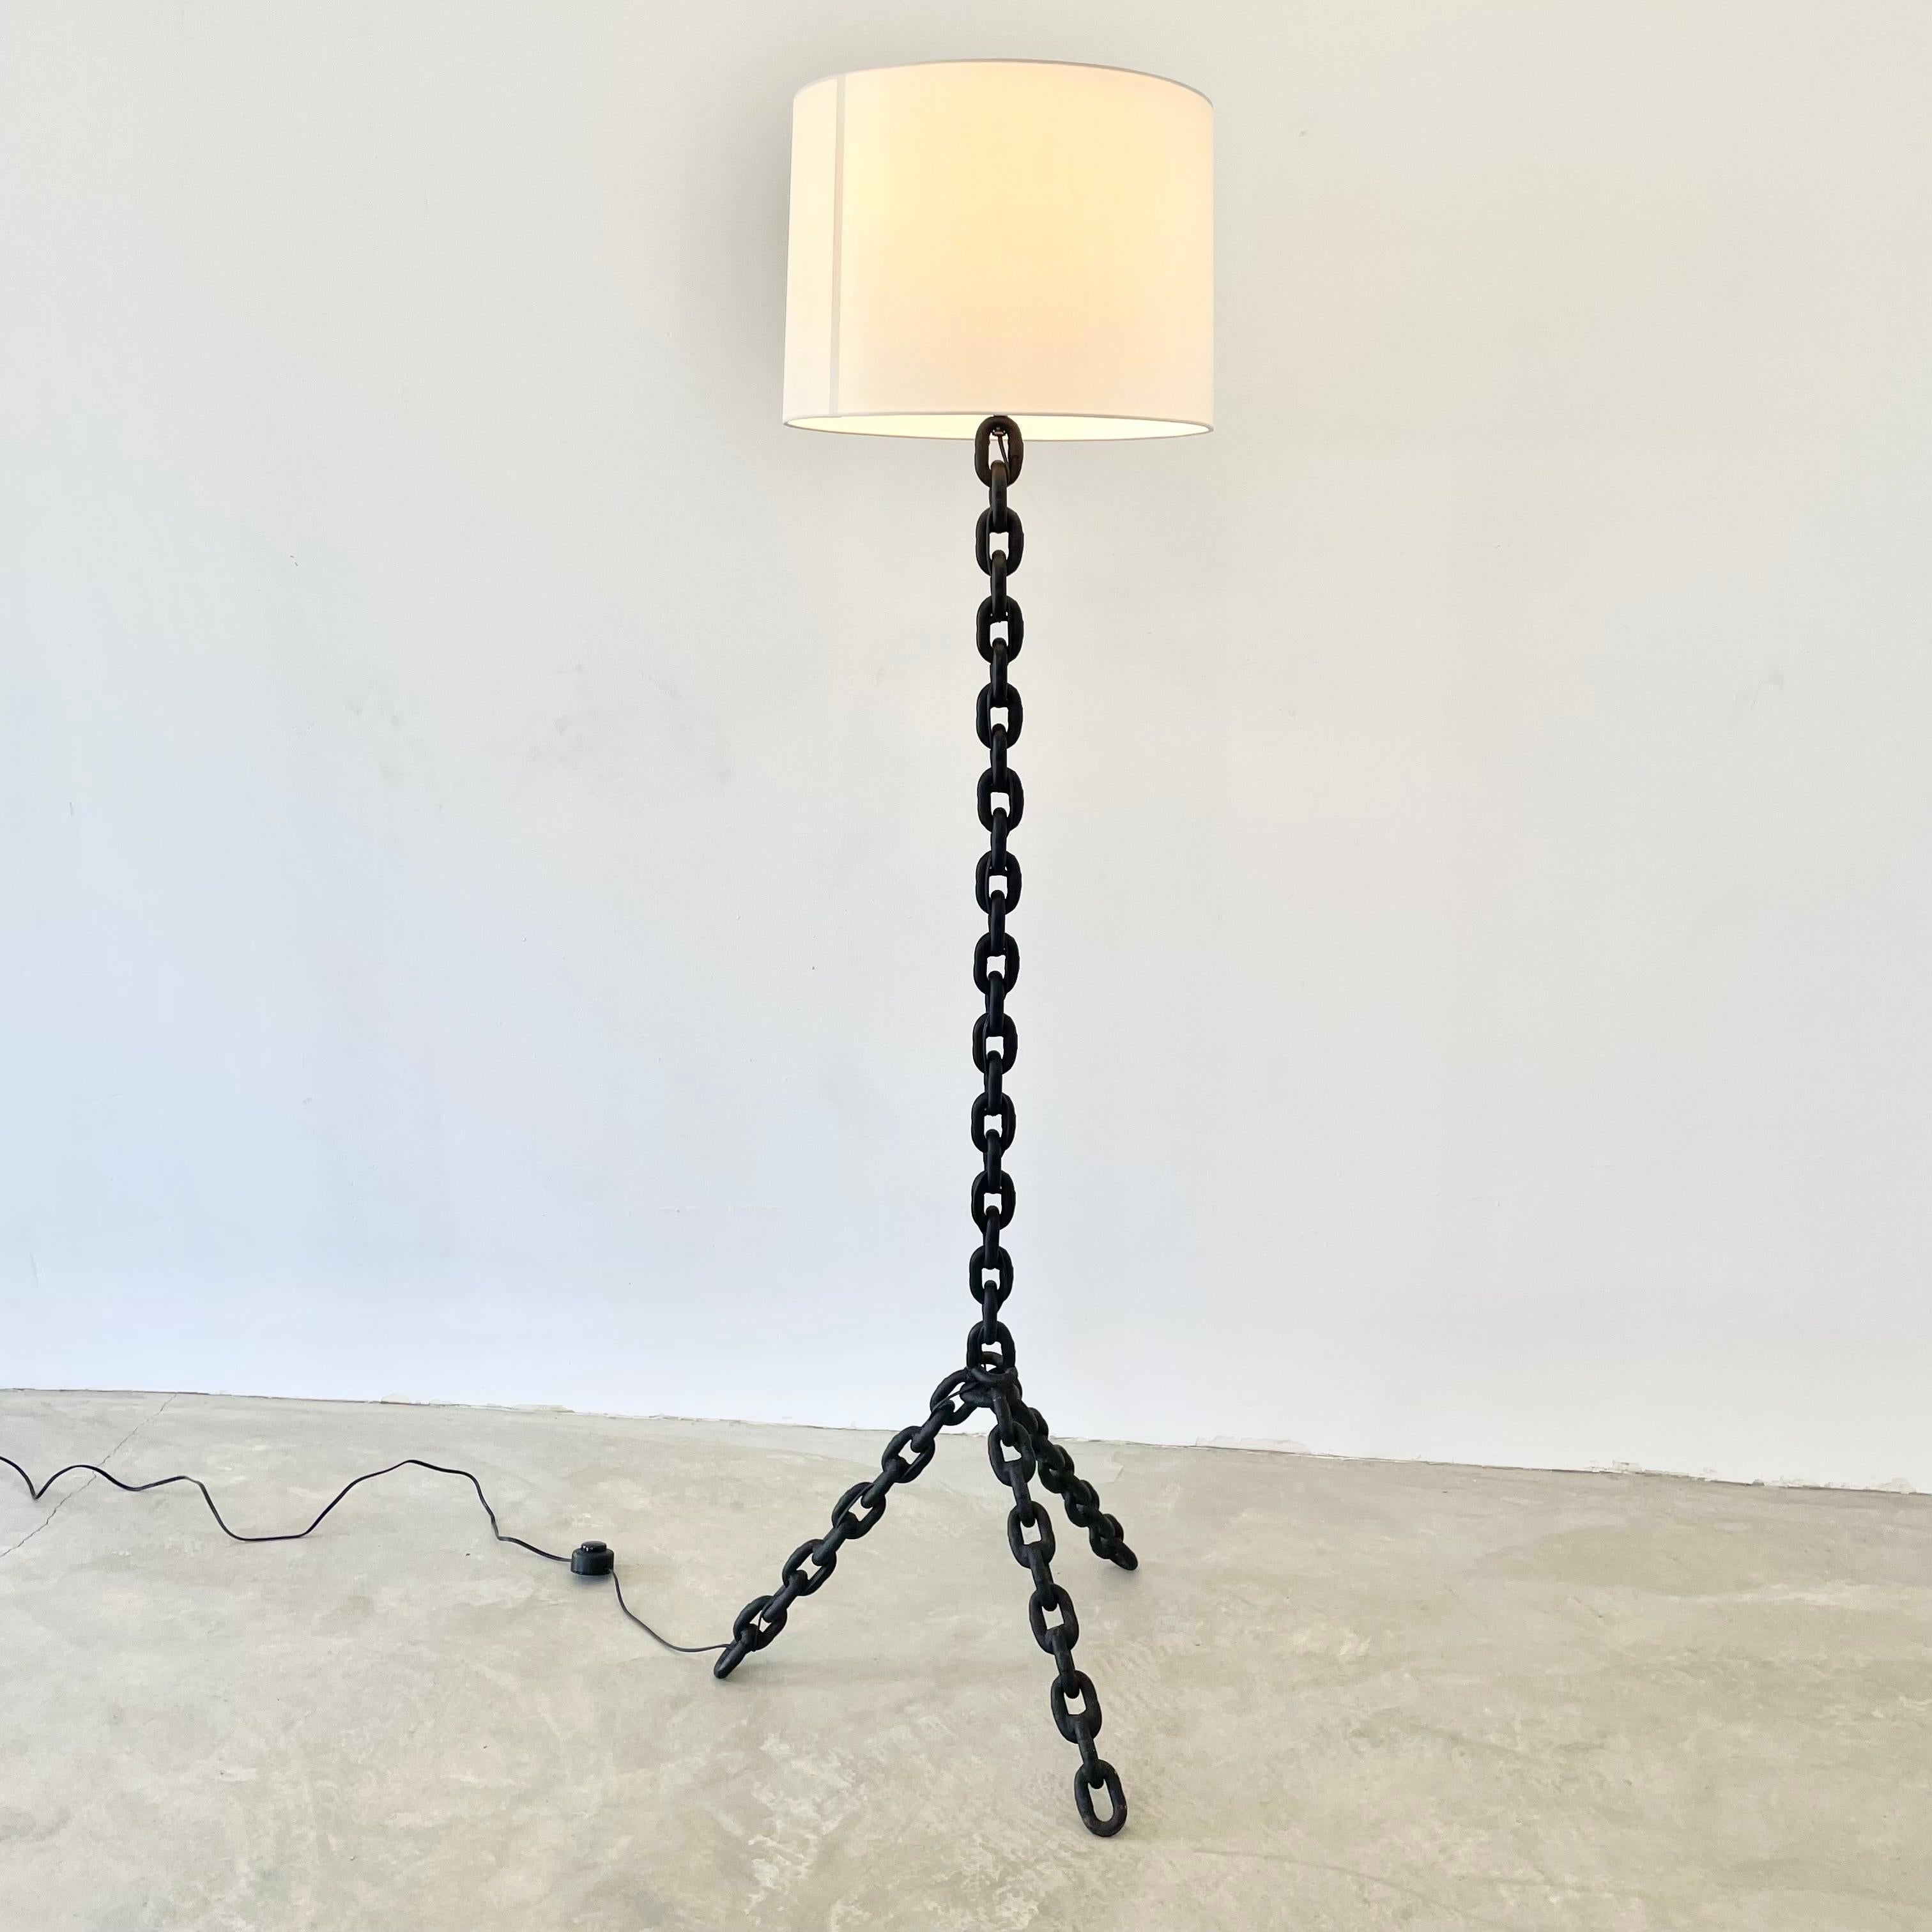 Silk French Chain Tripod Floor Lamp, 1960s France For Sale